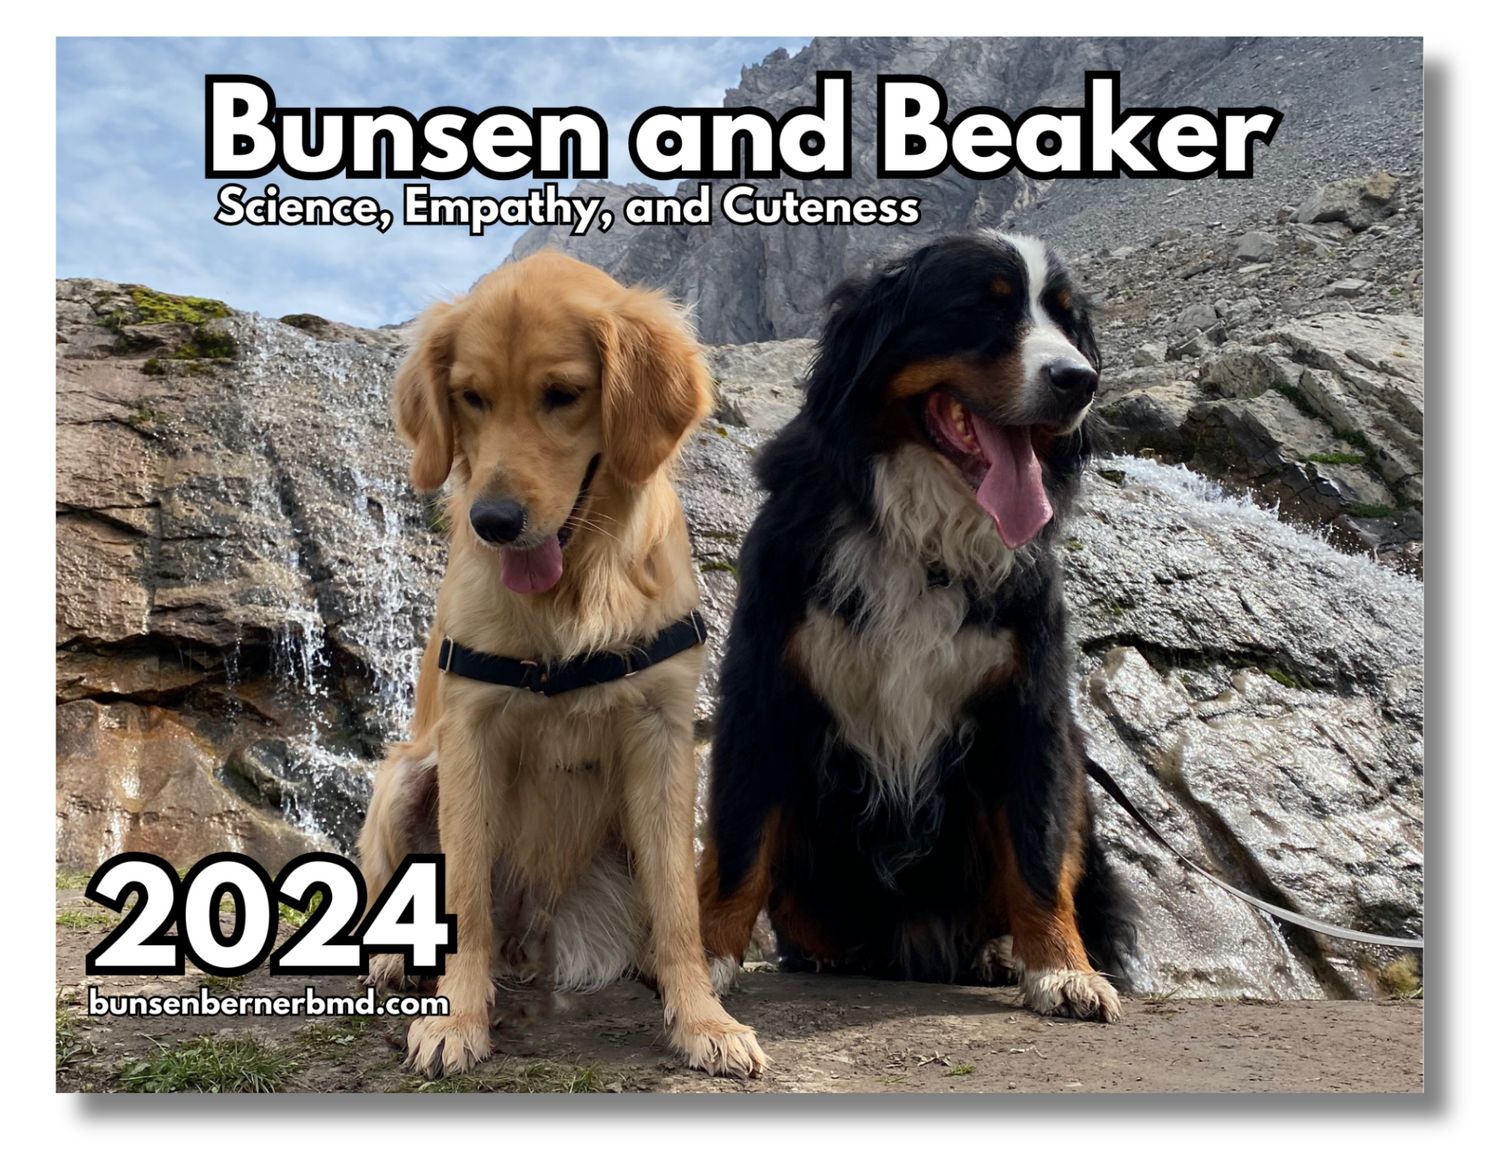 The 2024 Bunsen and Beaker Collection!